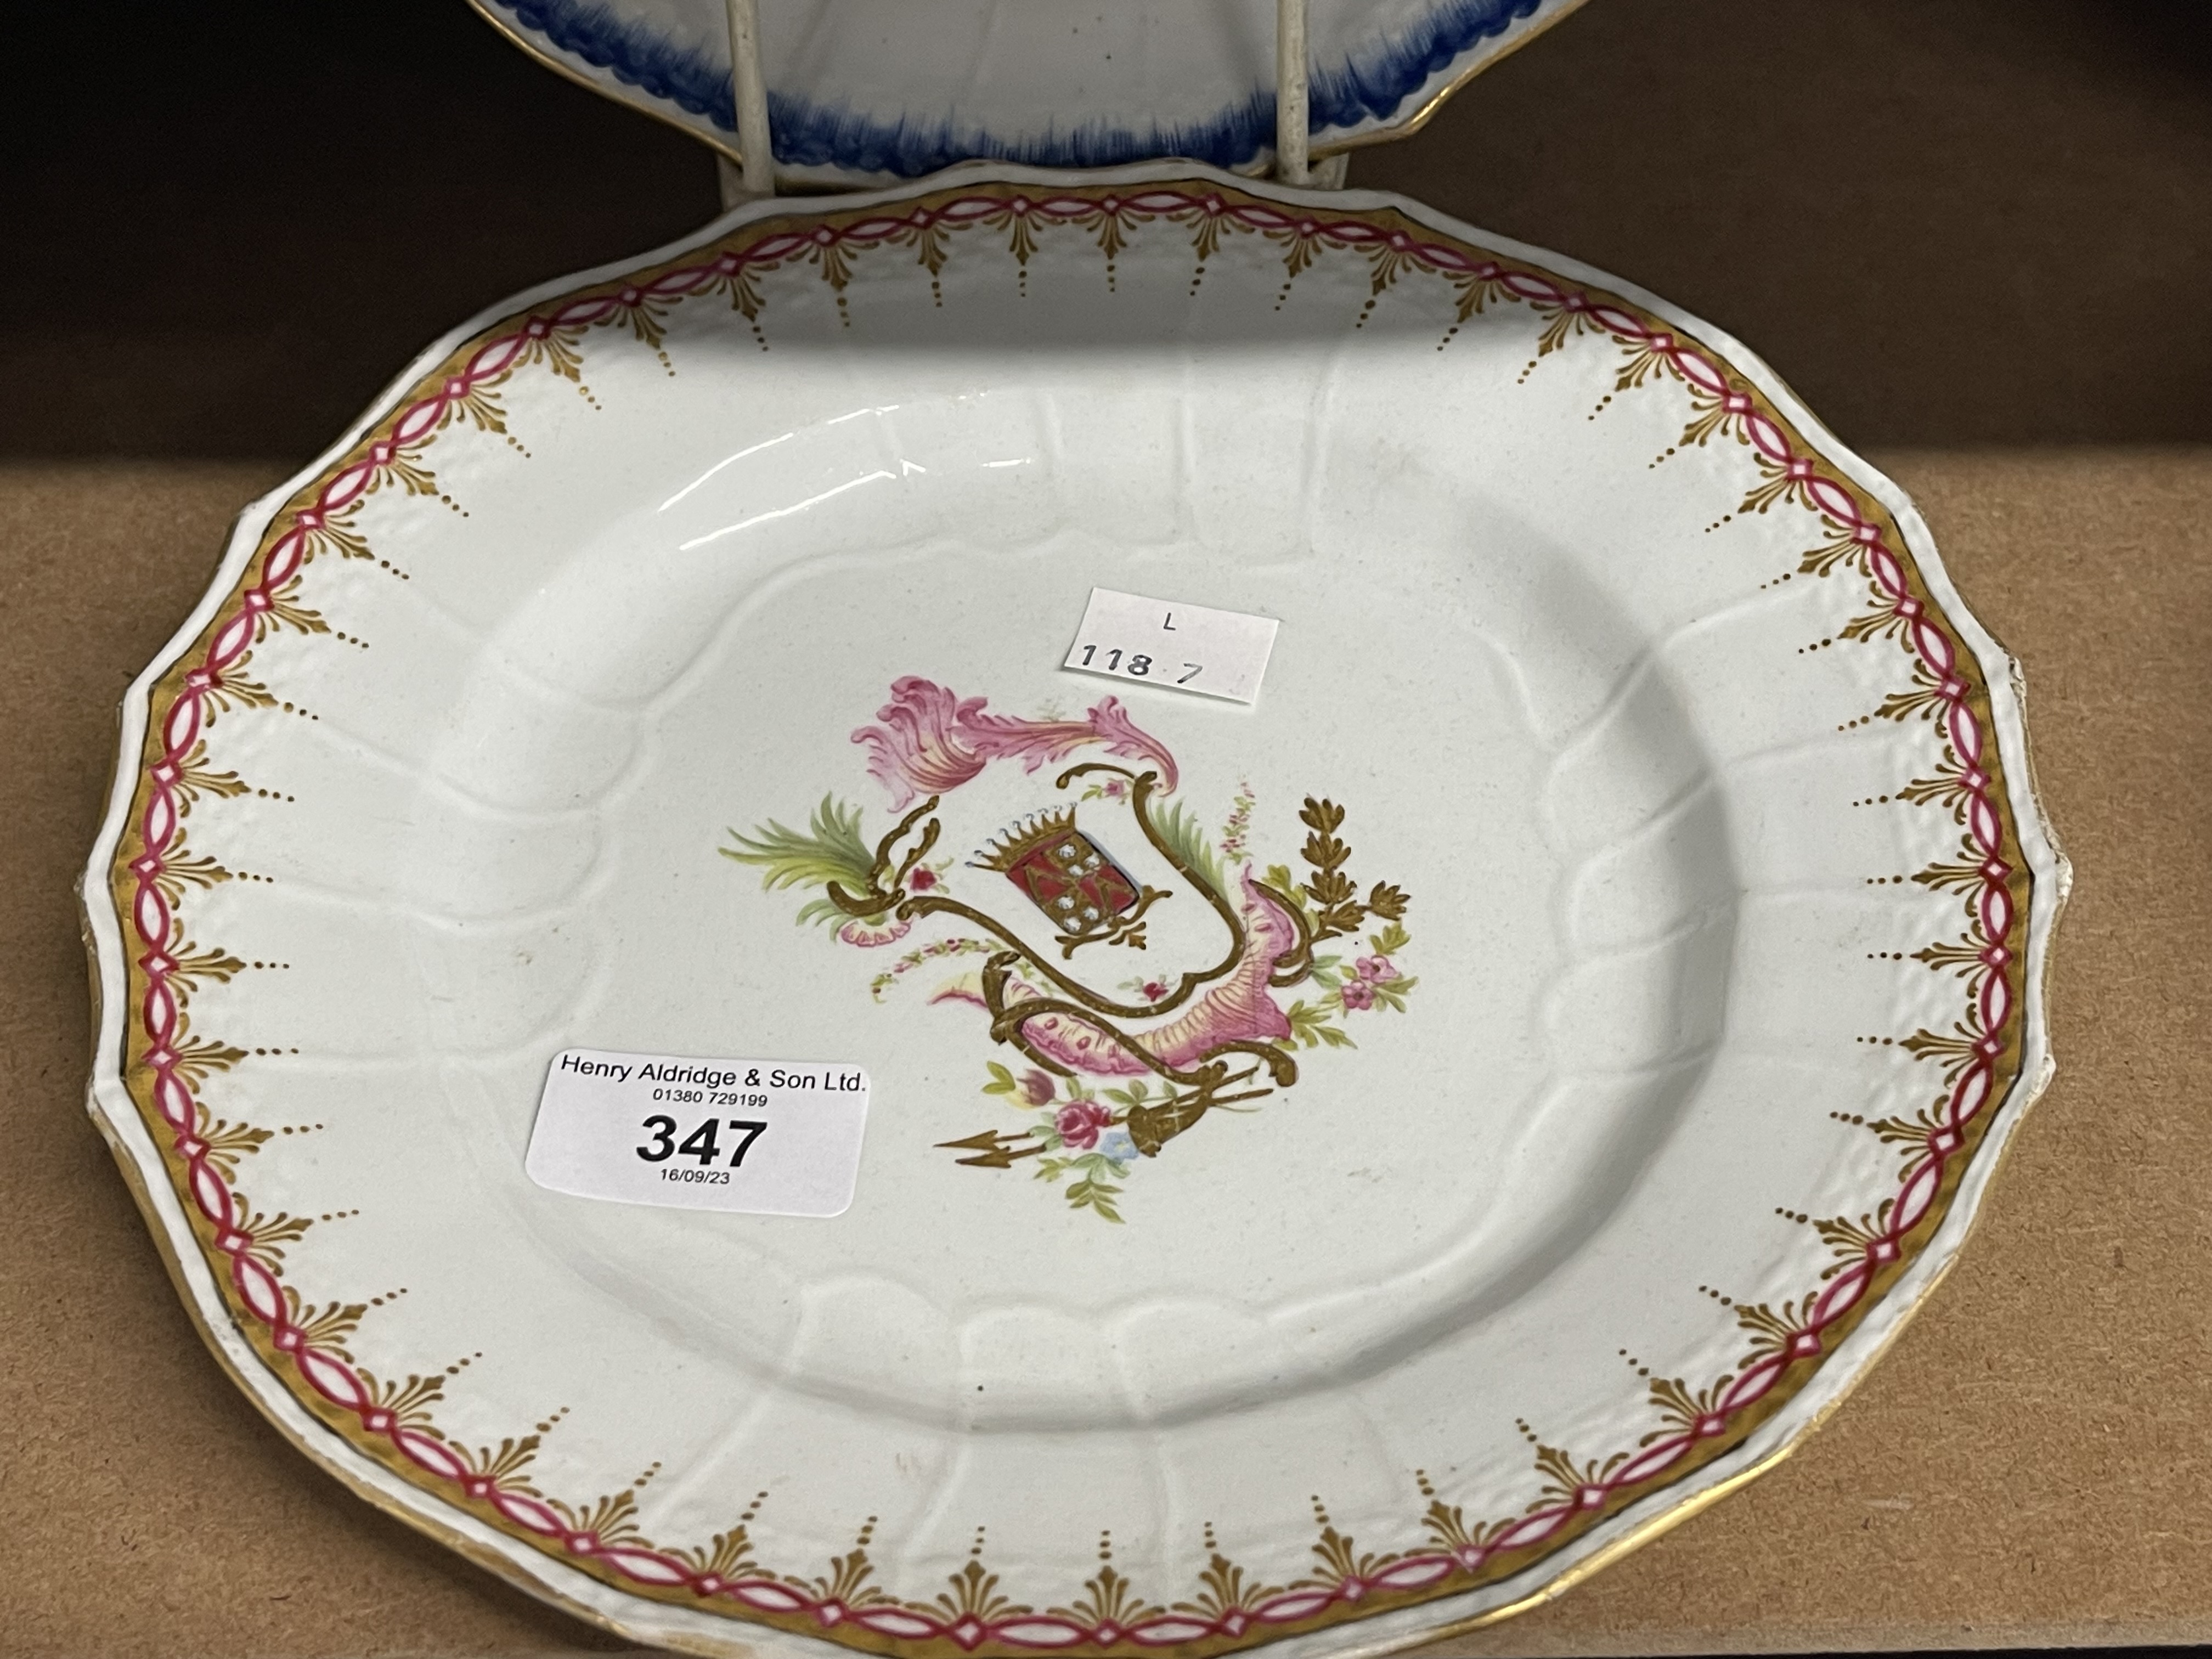 Tournai plates c1770, with moulded rims, one painted in blue with flowering branches, another with a - Image 2 of 3